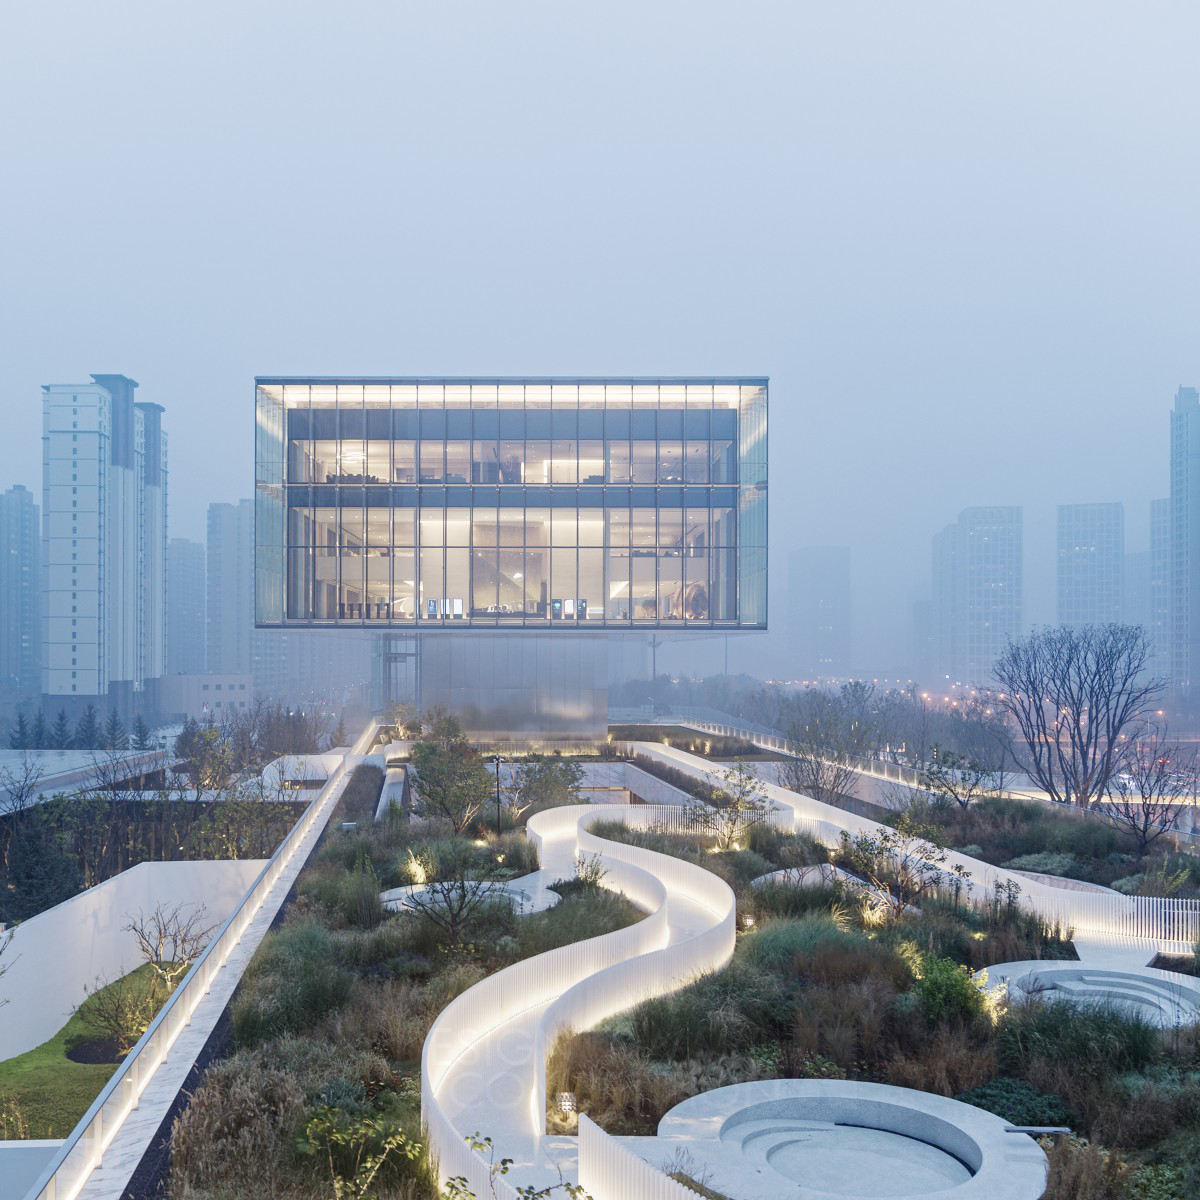 Xi'an Qujiang Art Center Exhibition Hall by gad